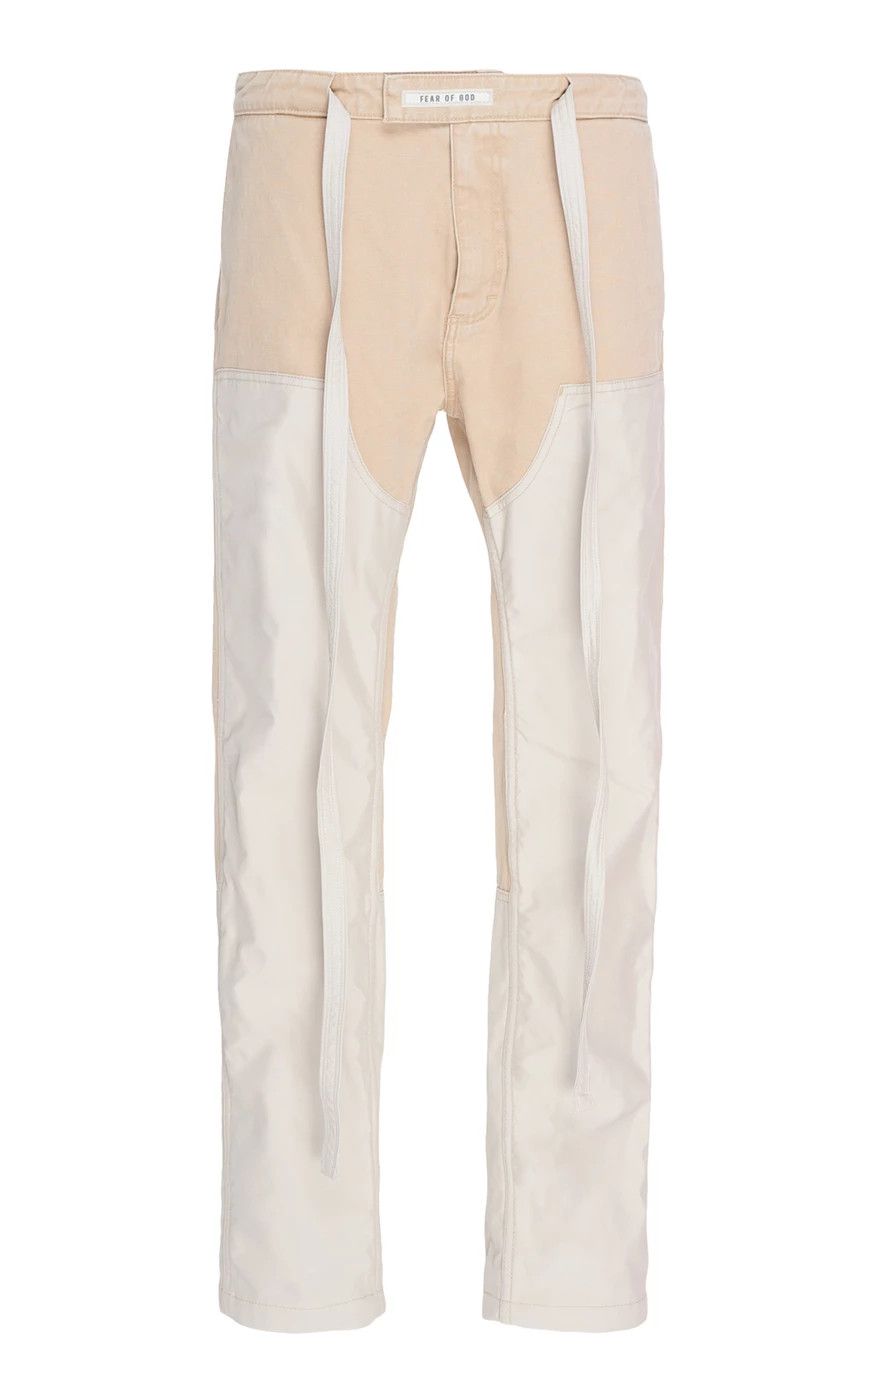 Fear of God Nylon Canvas Double Front Work Pants | Grailed